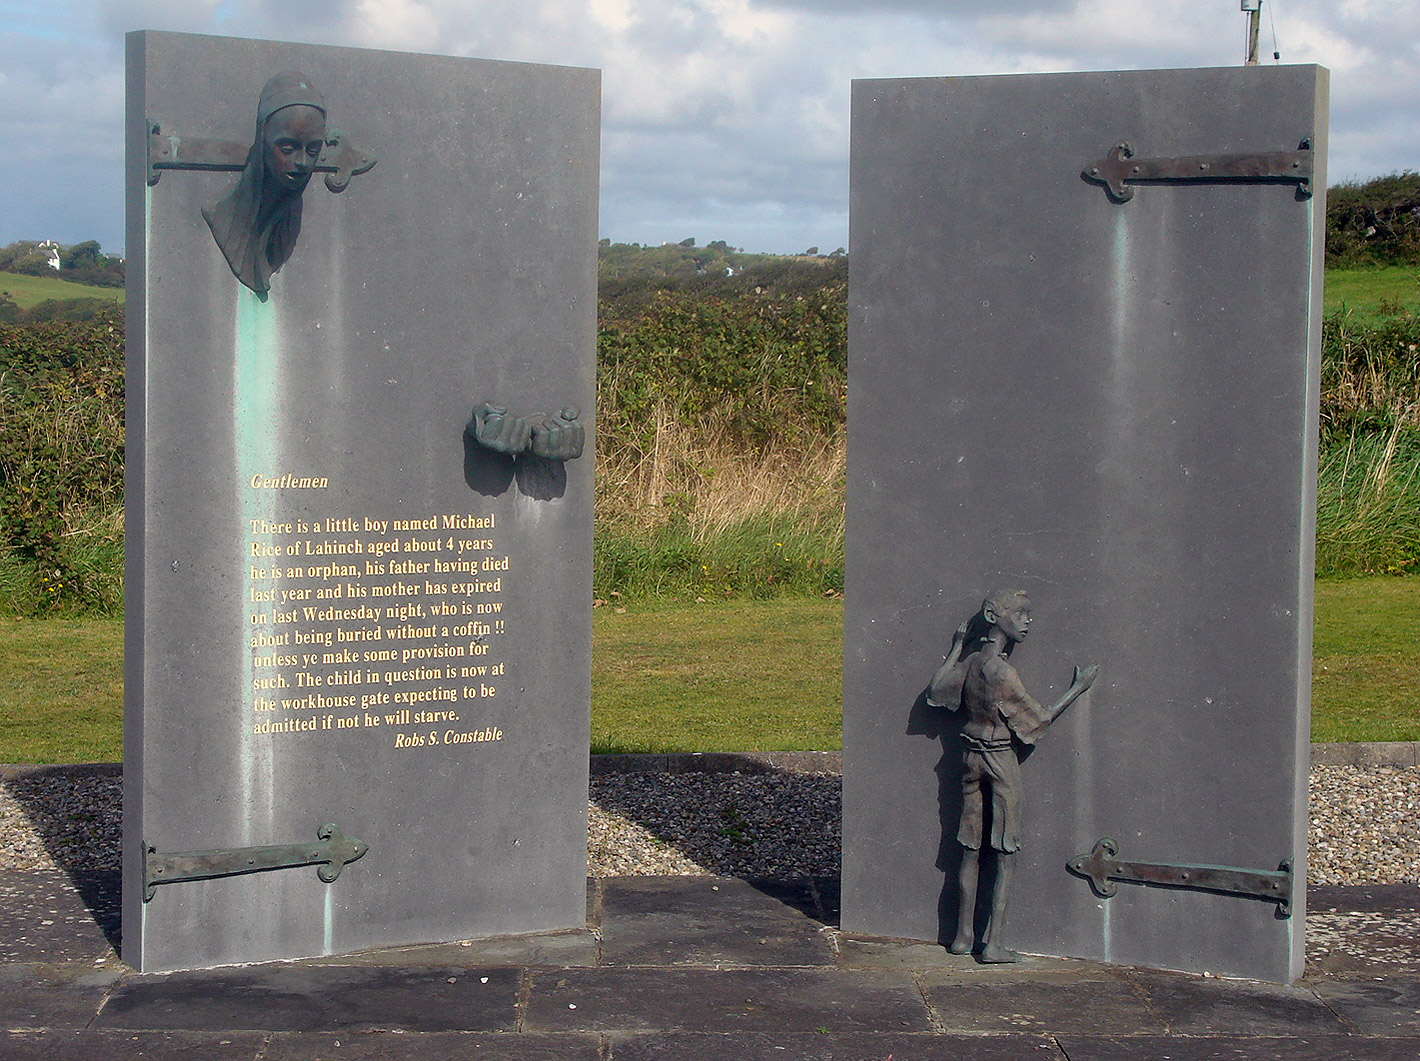 Monument An Gorta Mor on the road between Ennistymon to Lahinch in County Clare, located close to the former Workhouse.